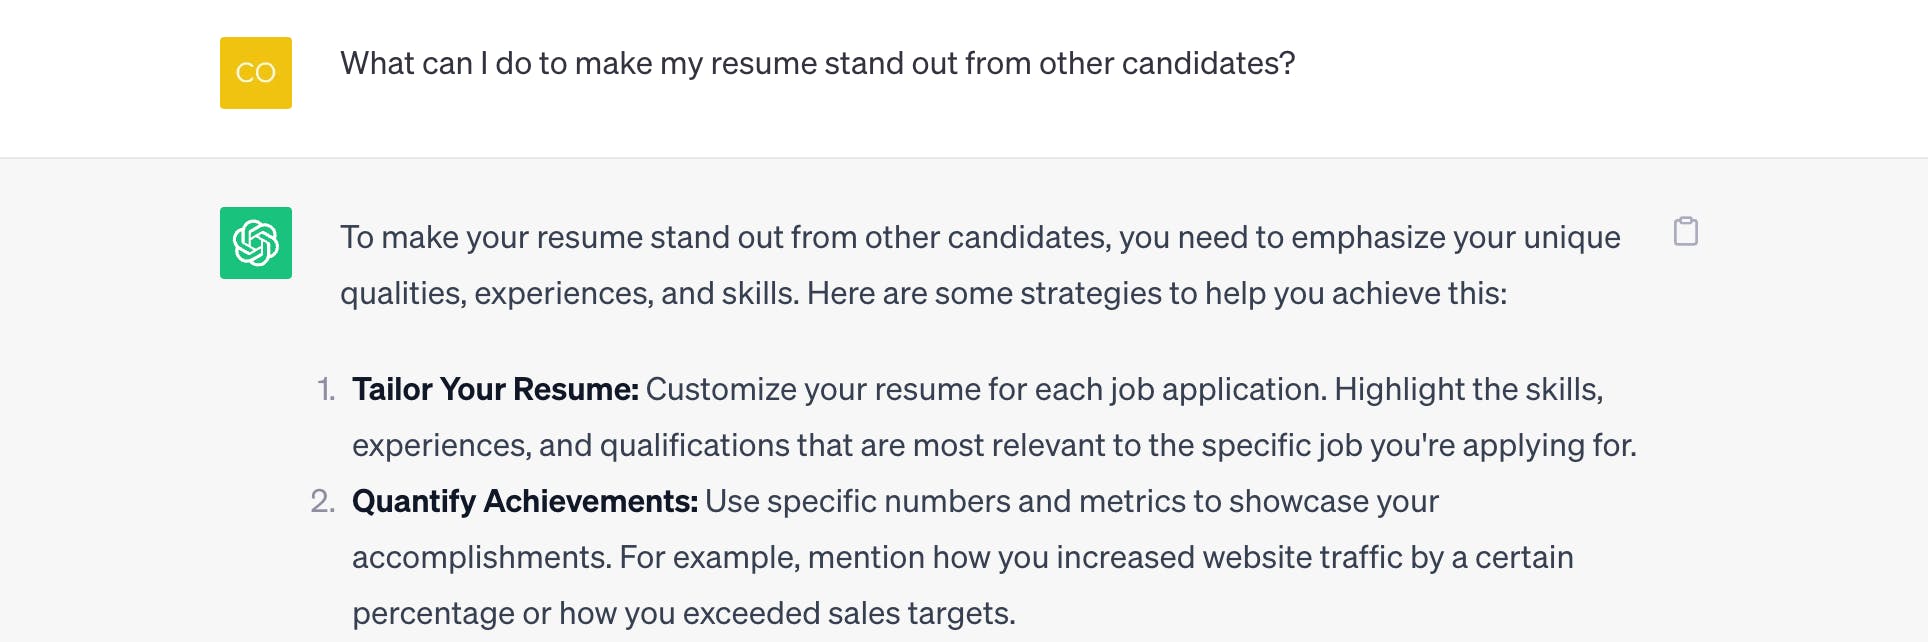 ChatGPT prompt to make resume stand out